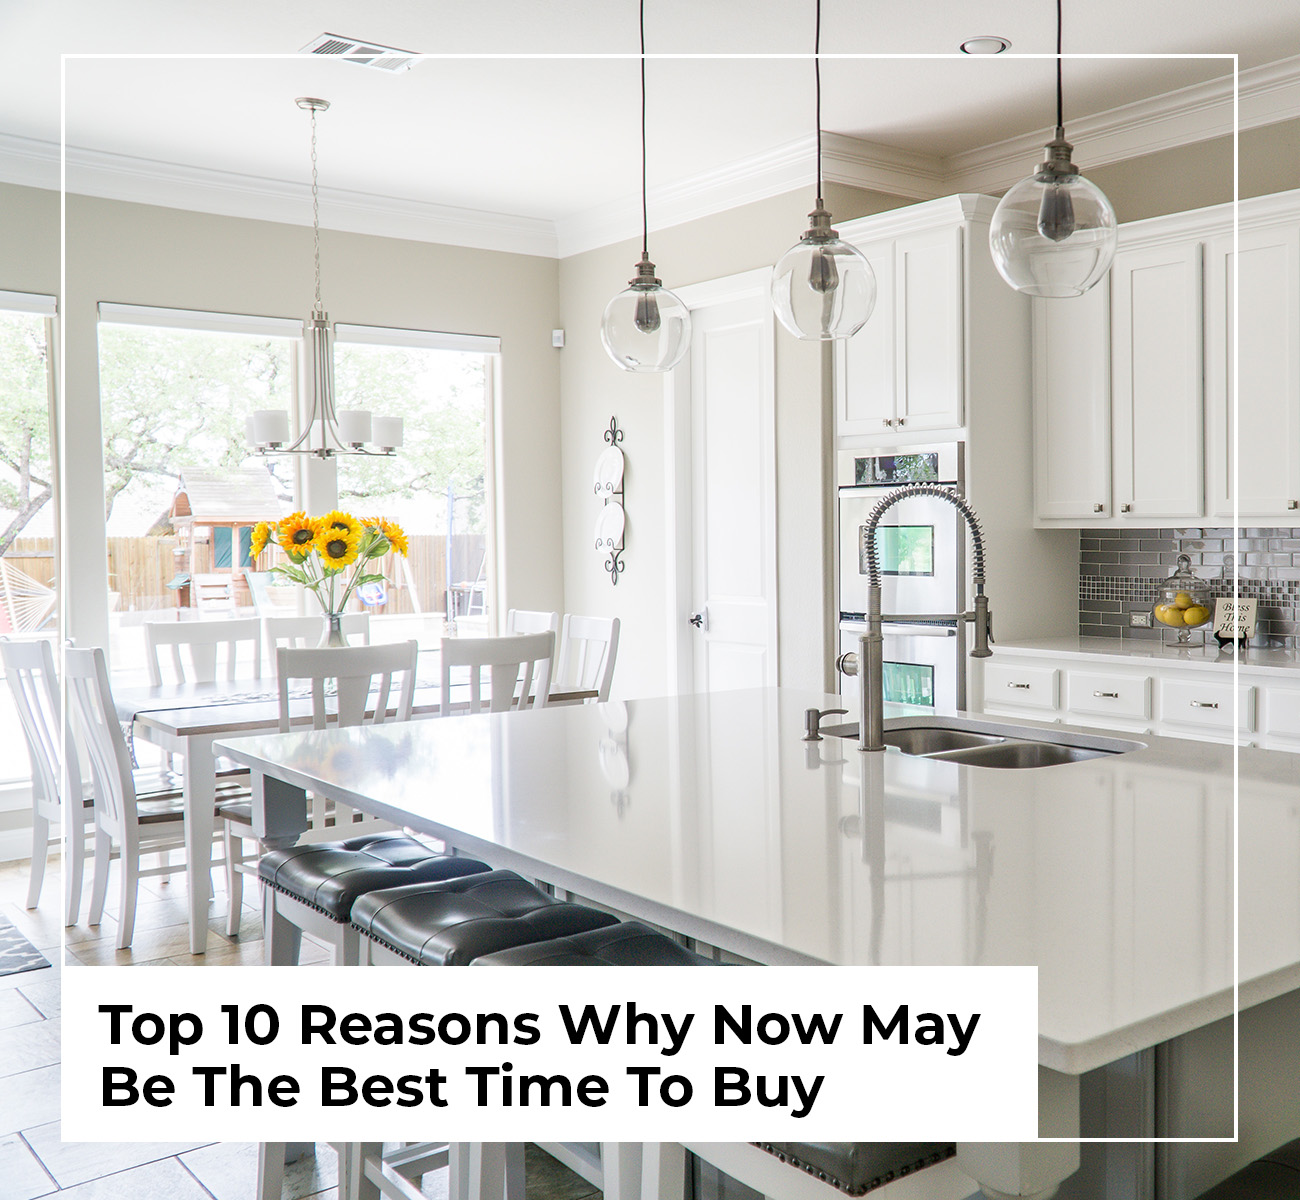 10 Reasons Why Now Might Be The Best Time To Buy